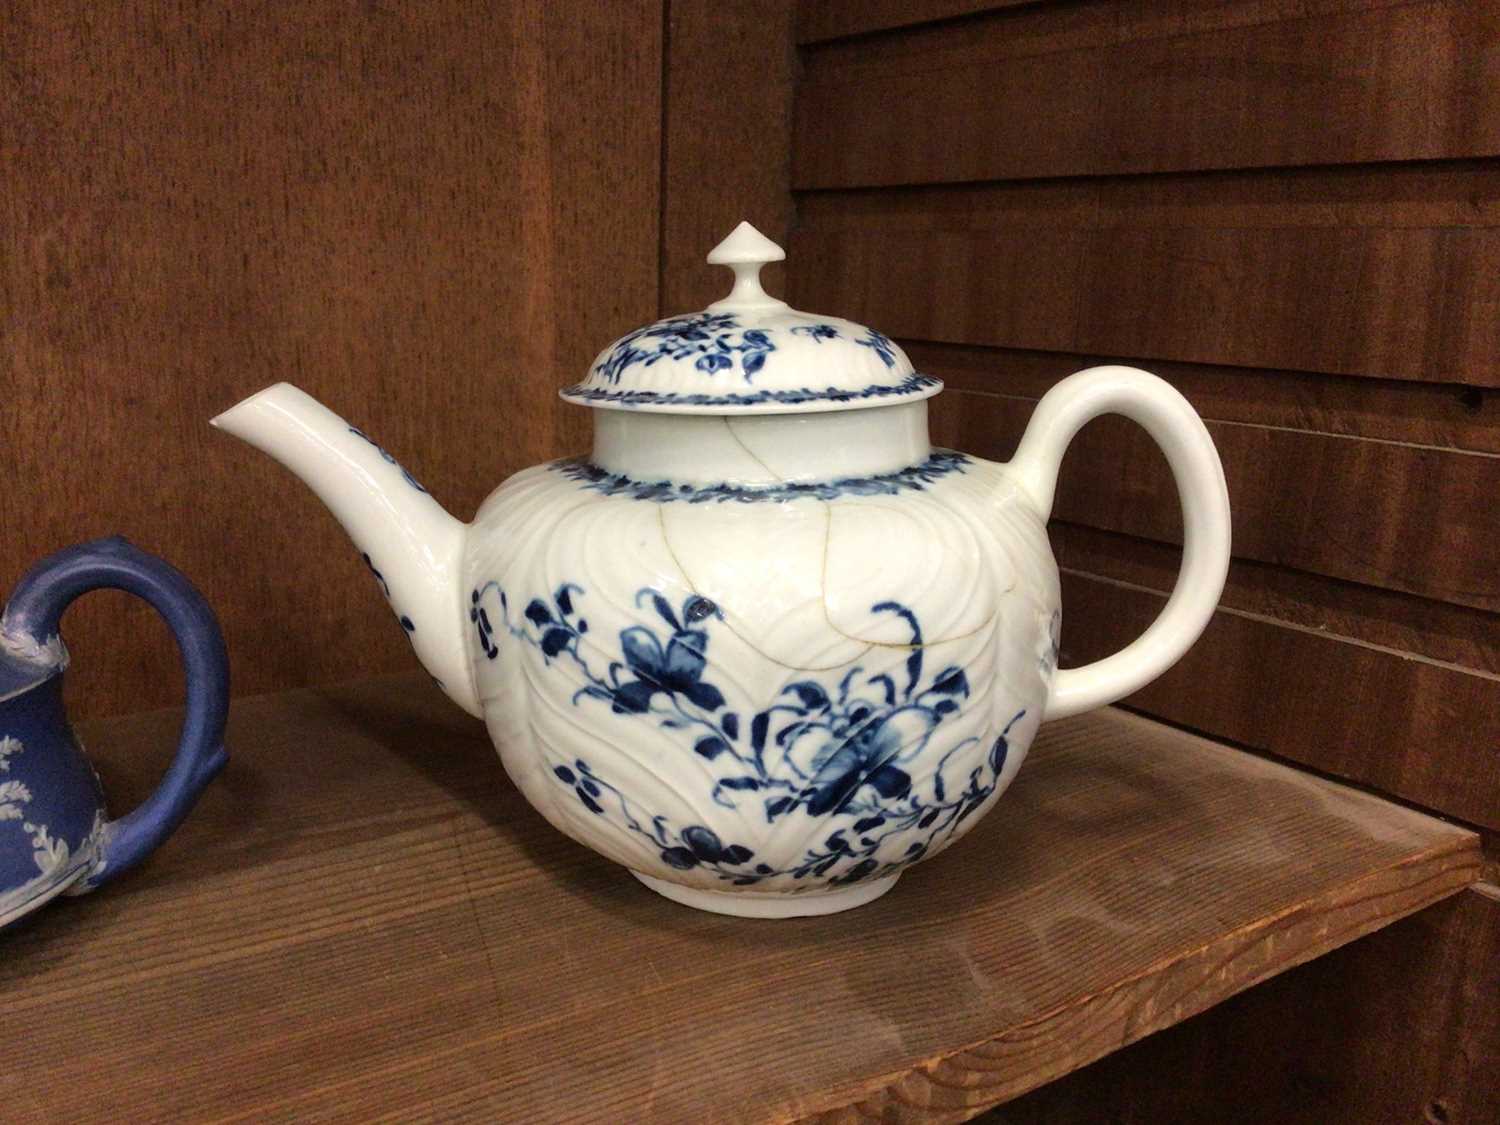 A Worcester blue and white teapot